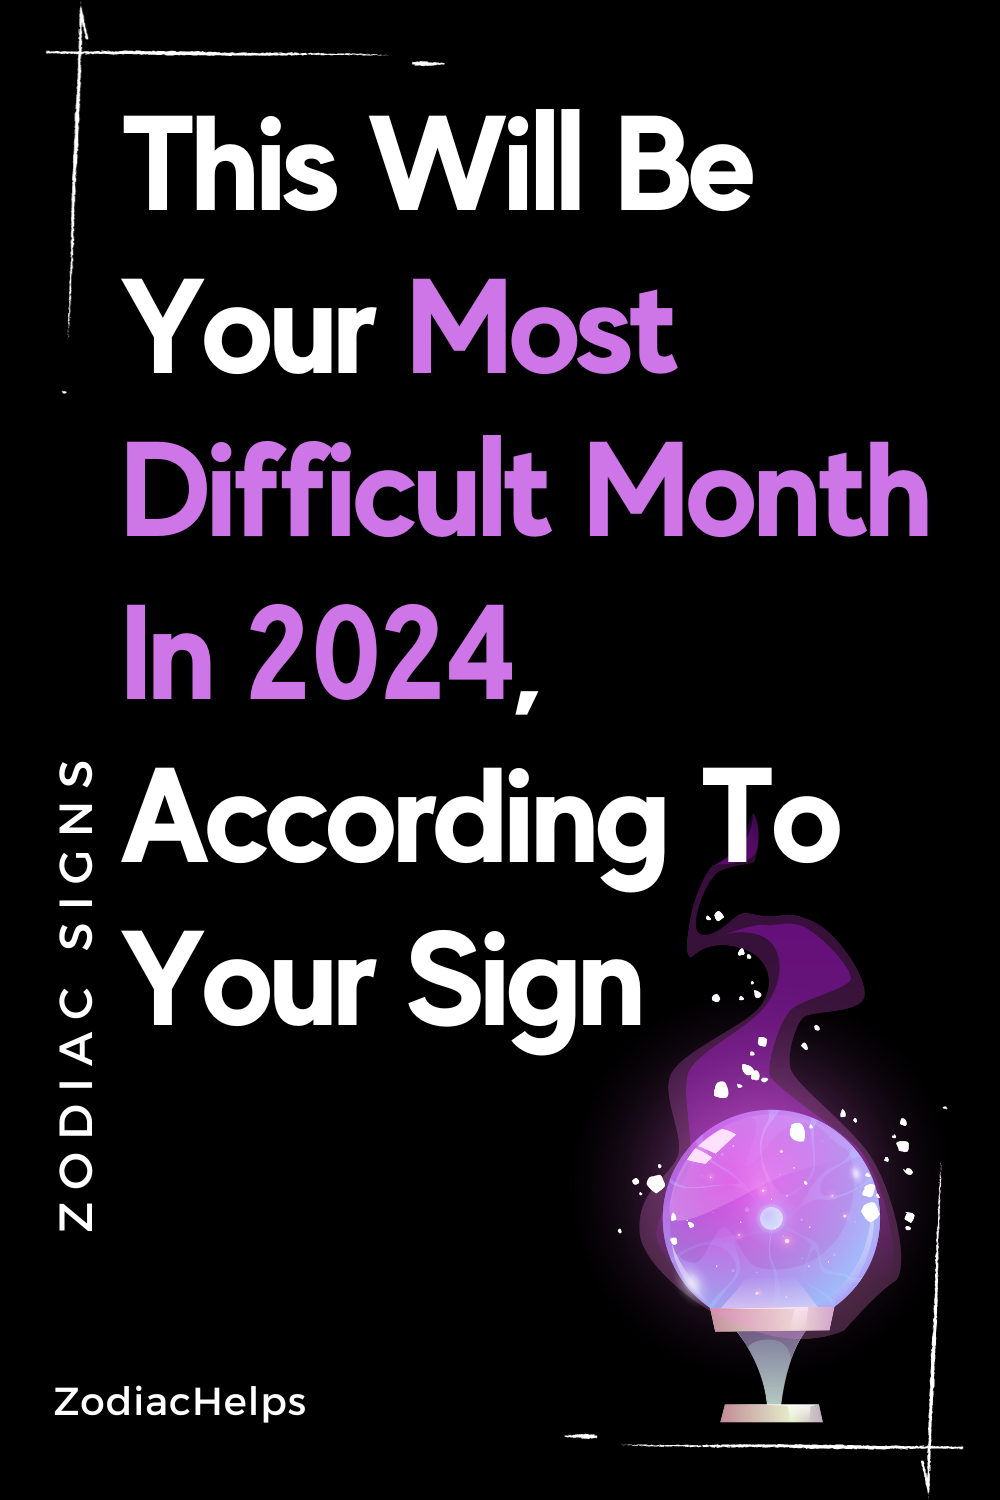 This Will Be Your Most Difficult Month In 2024, According To Your Sign